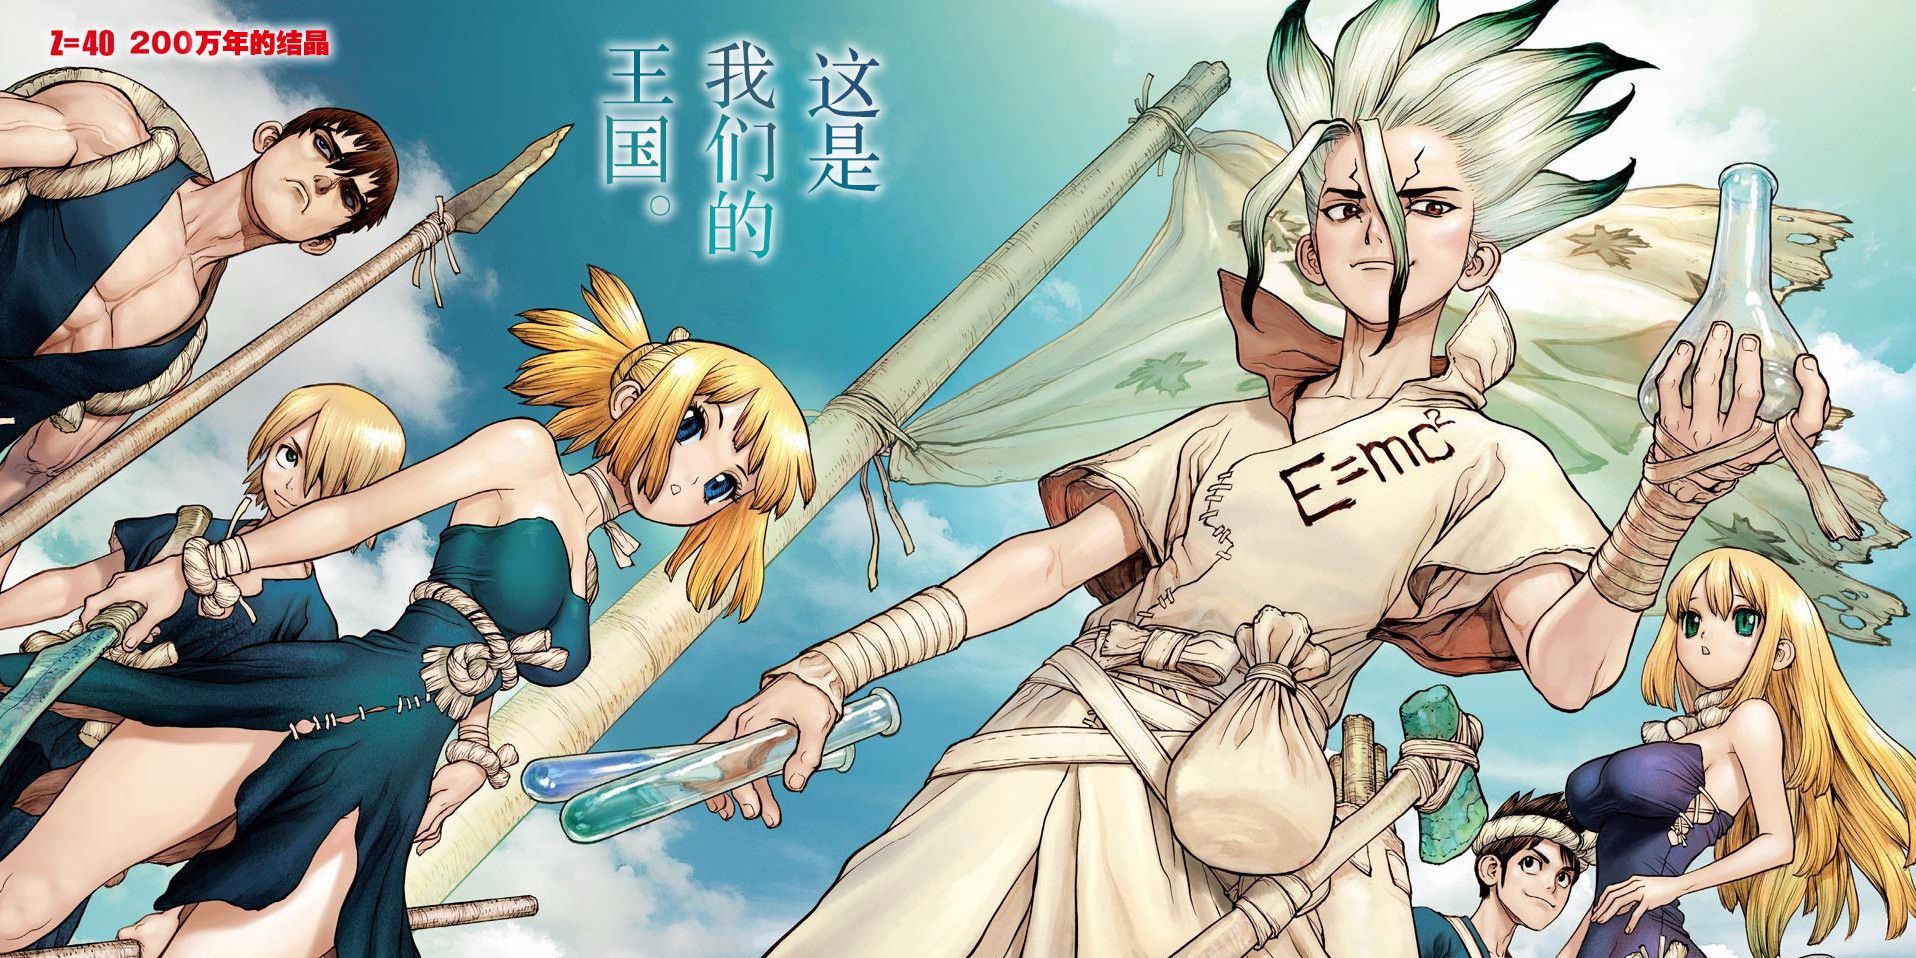 Dr Stone How to Get Started With the Anime & Manga